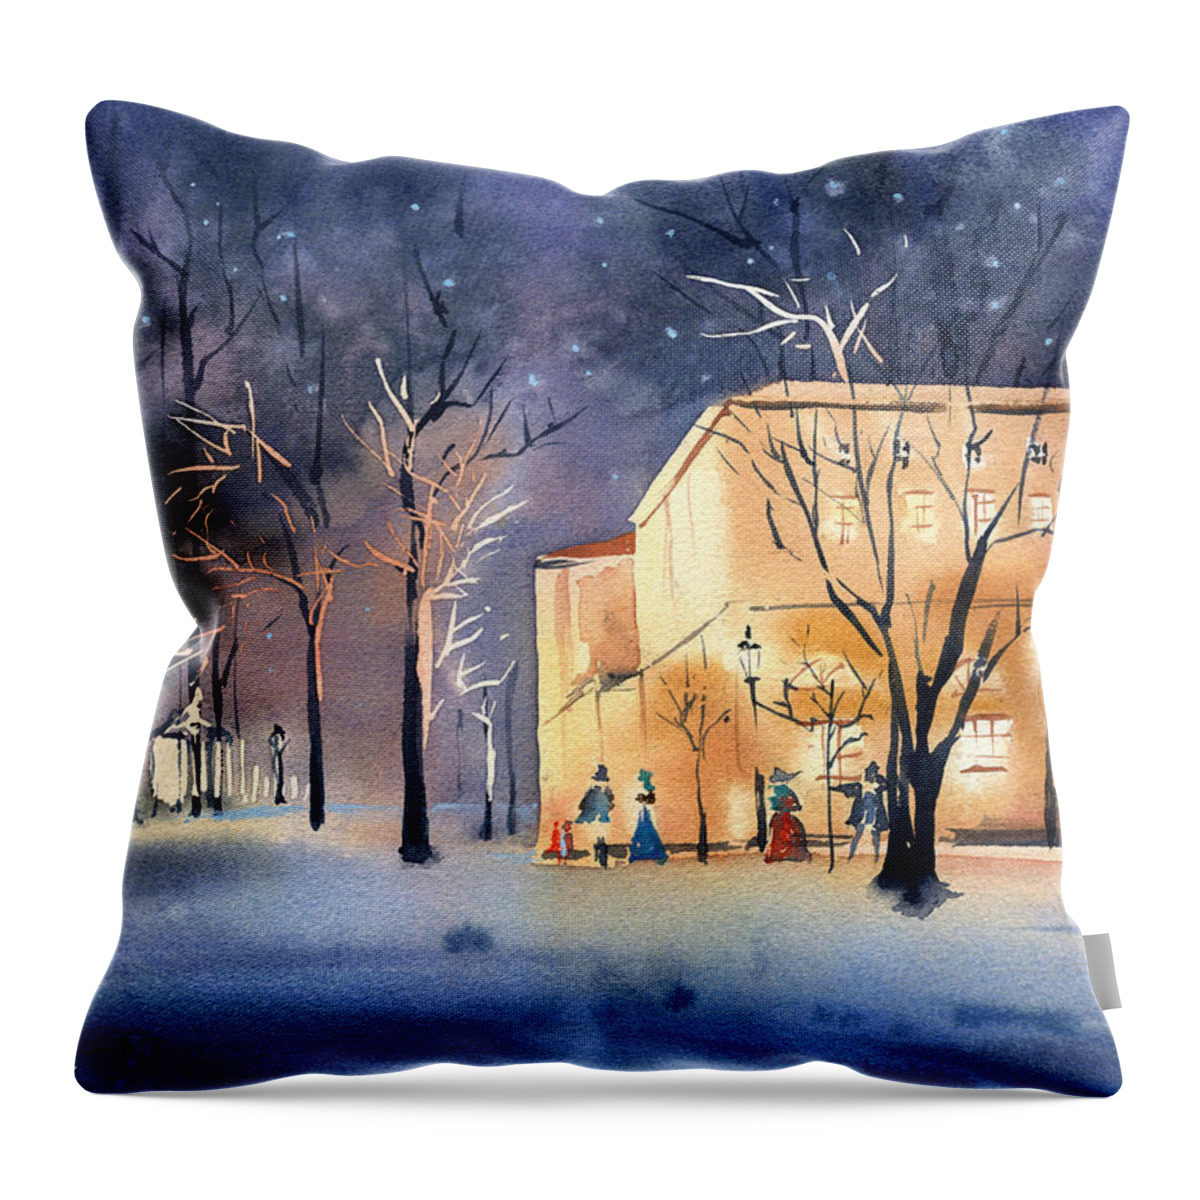 Petersburg Throw Pillow featuring the painting Winter Night at Pavlovsk Palace by Dora Hathazi Mendes